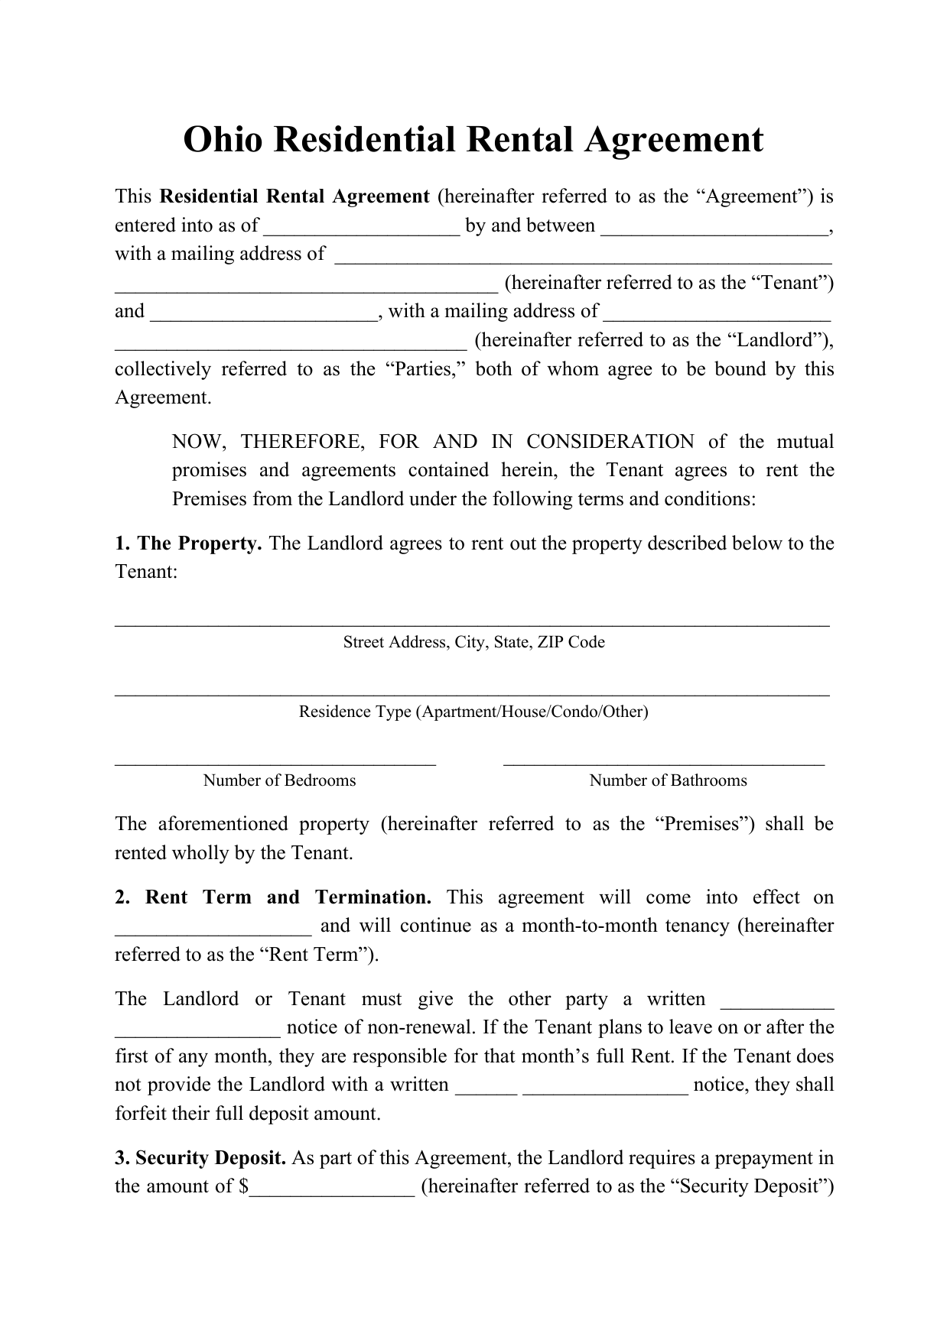 ohio-residential-rental-agreement-template-fill-out-sign-online-and